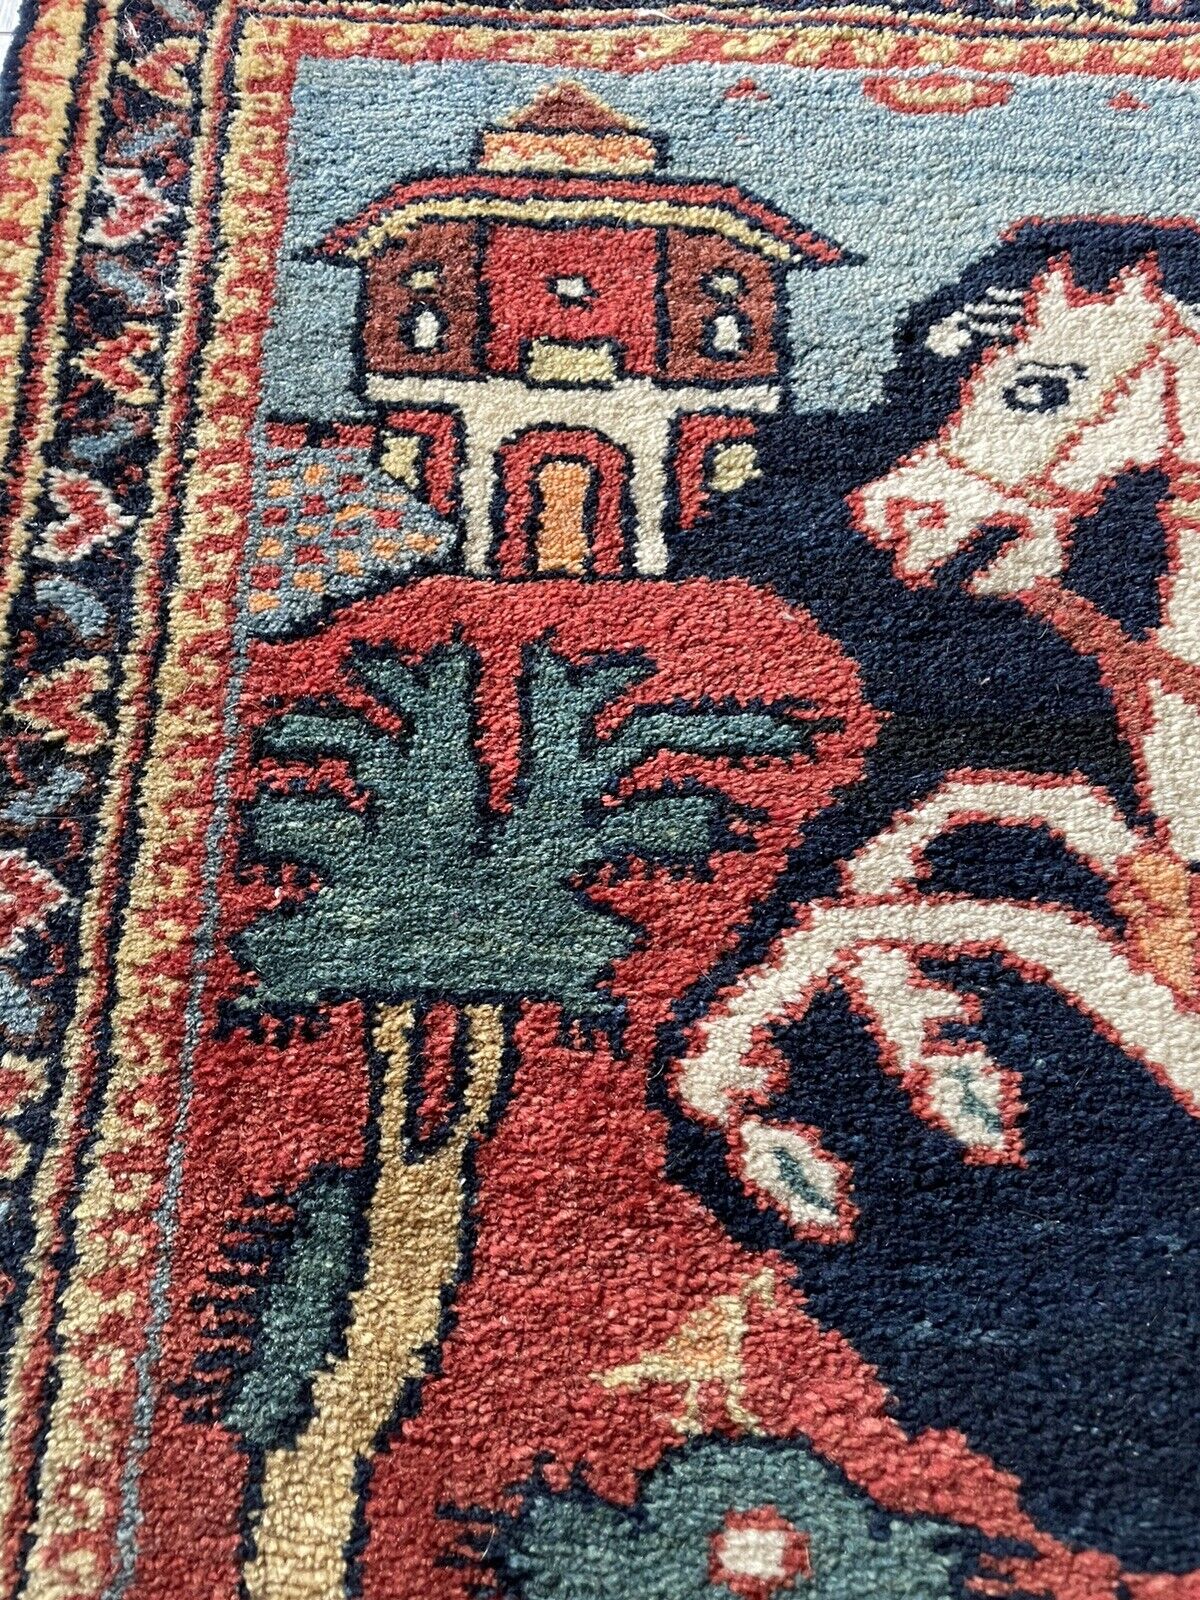 Close-up of fine artistry on Handmade Antique Persian Lilihan Collectible Rug - Detailed view showcasing the fine artistry and craftsmanship of the Persian-style rug.